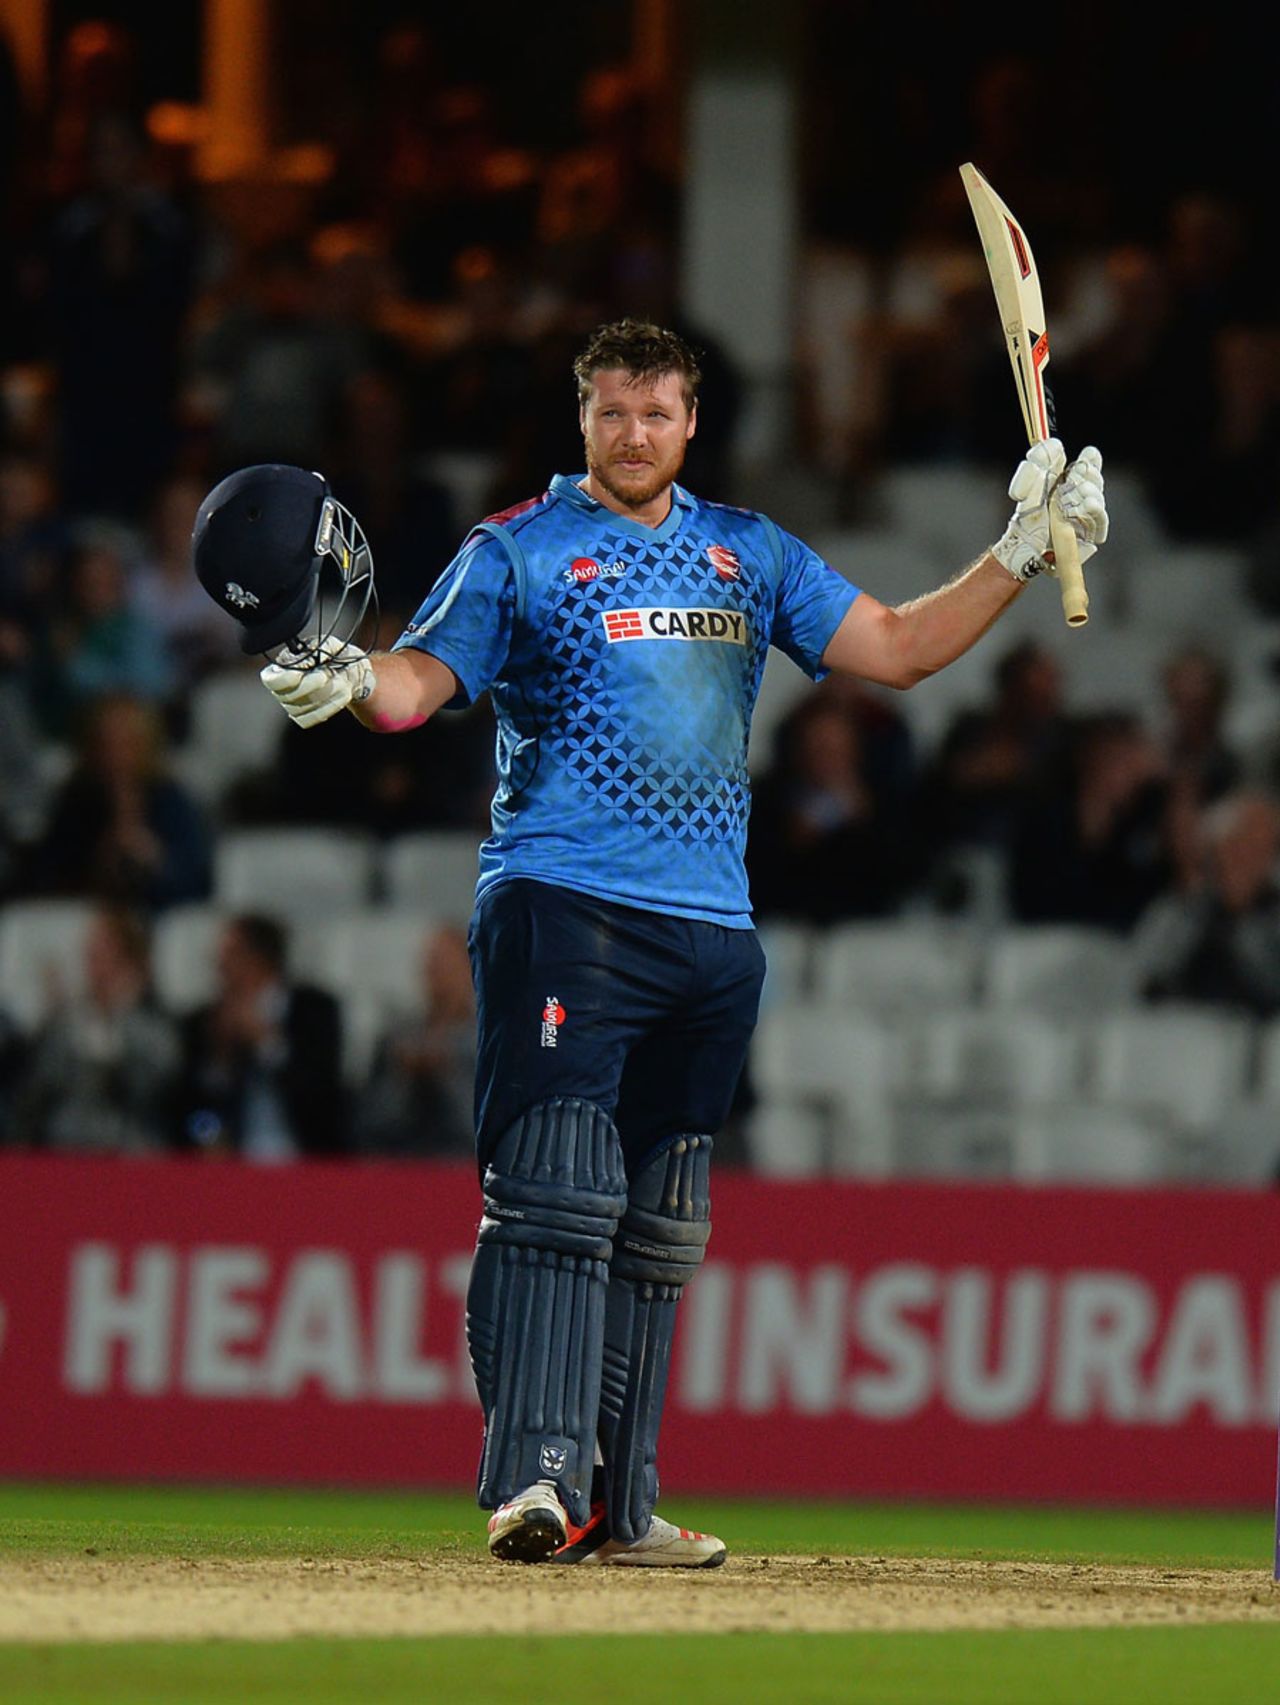 Matt Coles' extraordinary maiden List A hundred was not quite enough for victory, Surrey v Kent, Kia Oval, Royal London Cup quarter-final, August 27, 2015